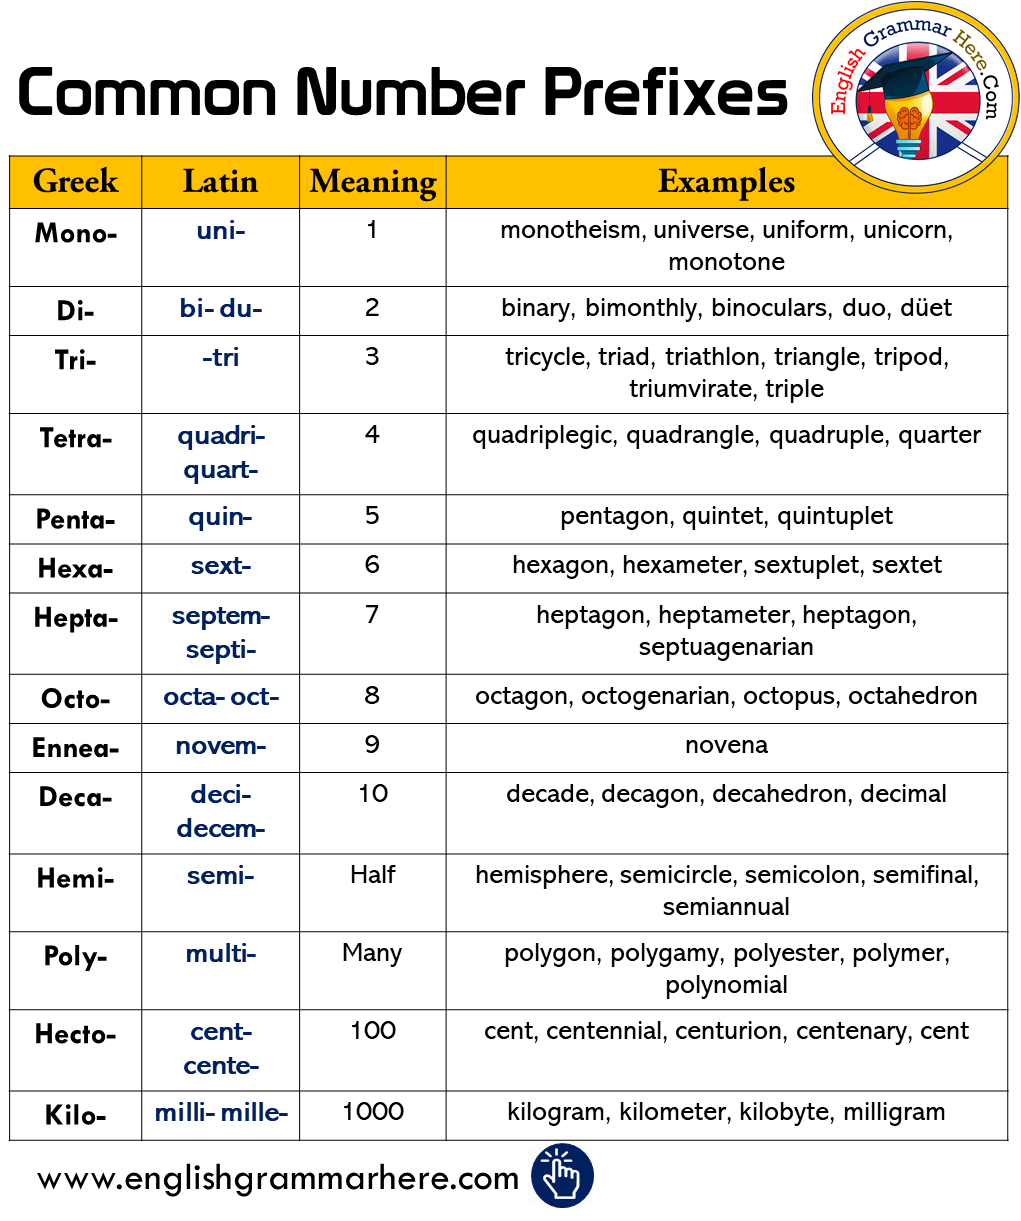 English Common Number Prefixes, Meanings and Examples